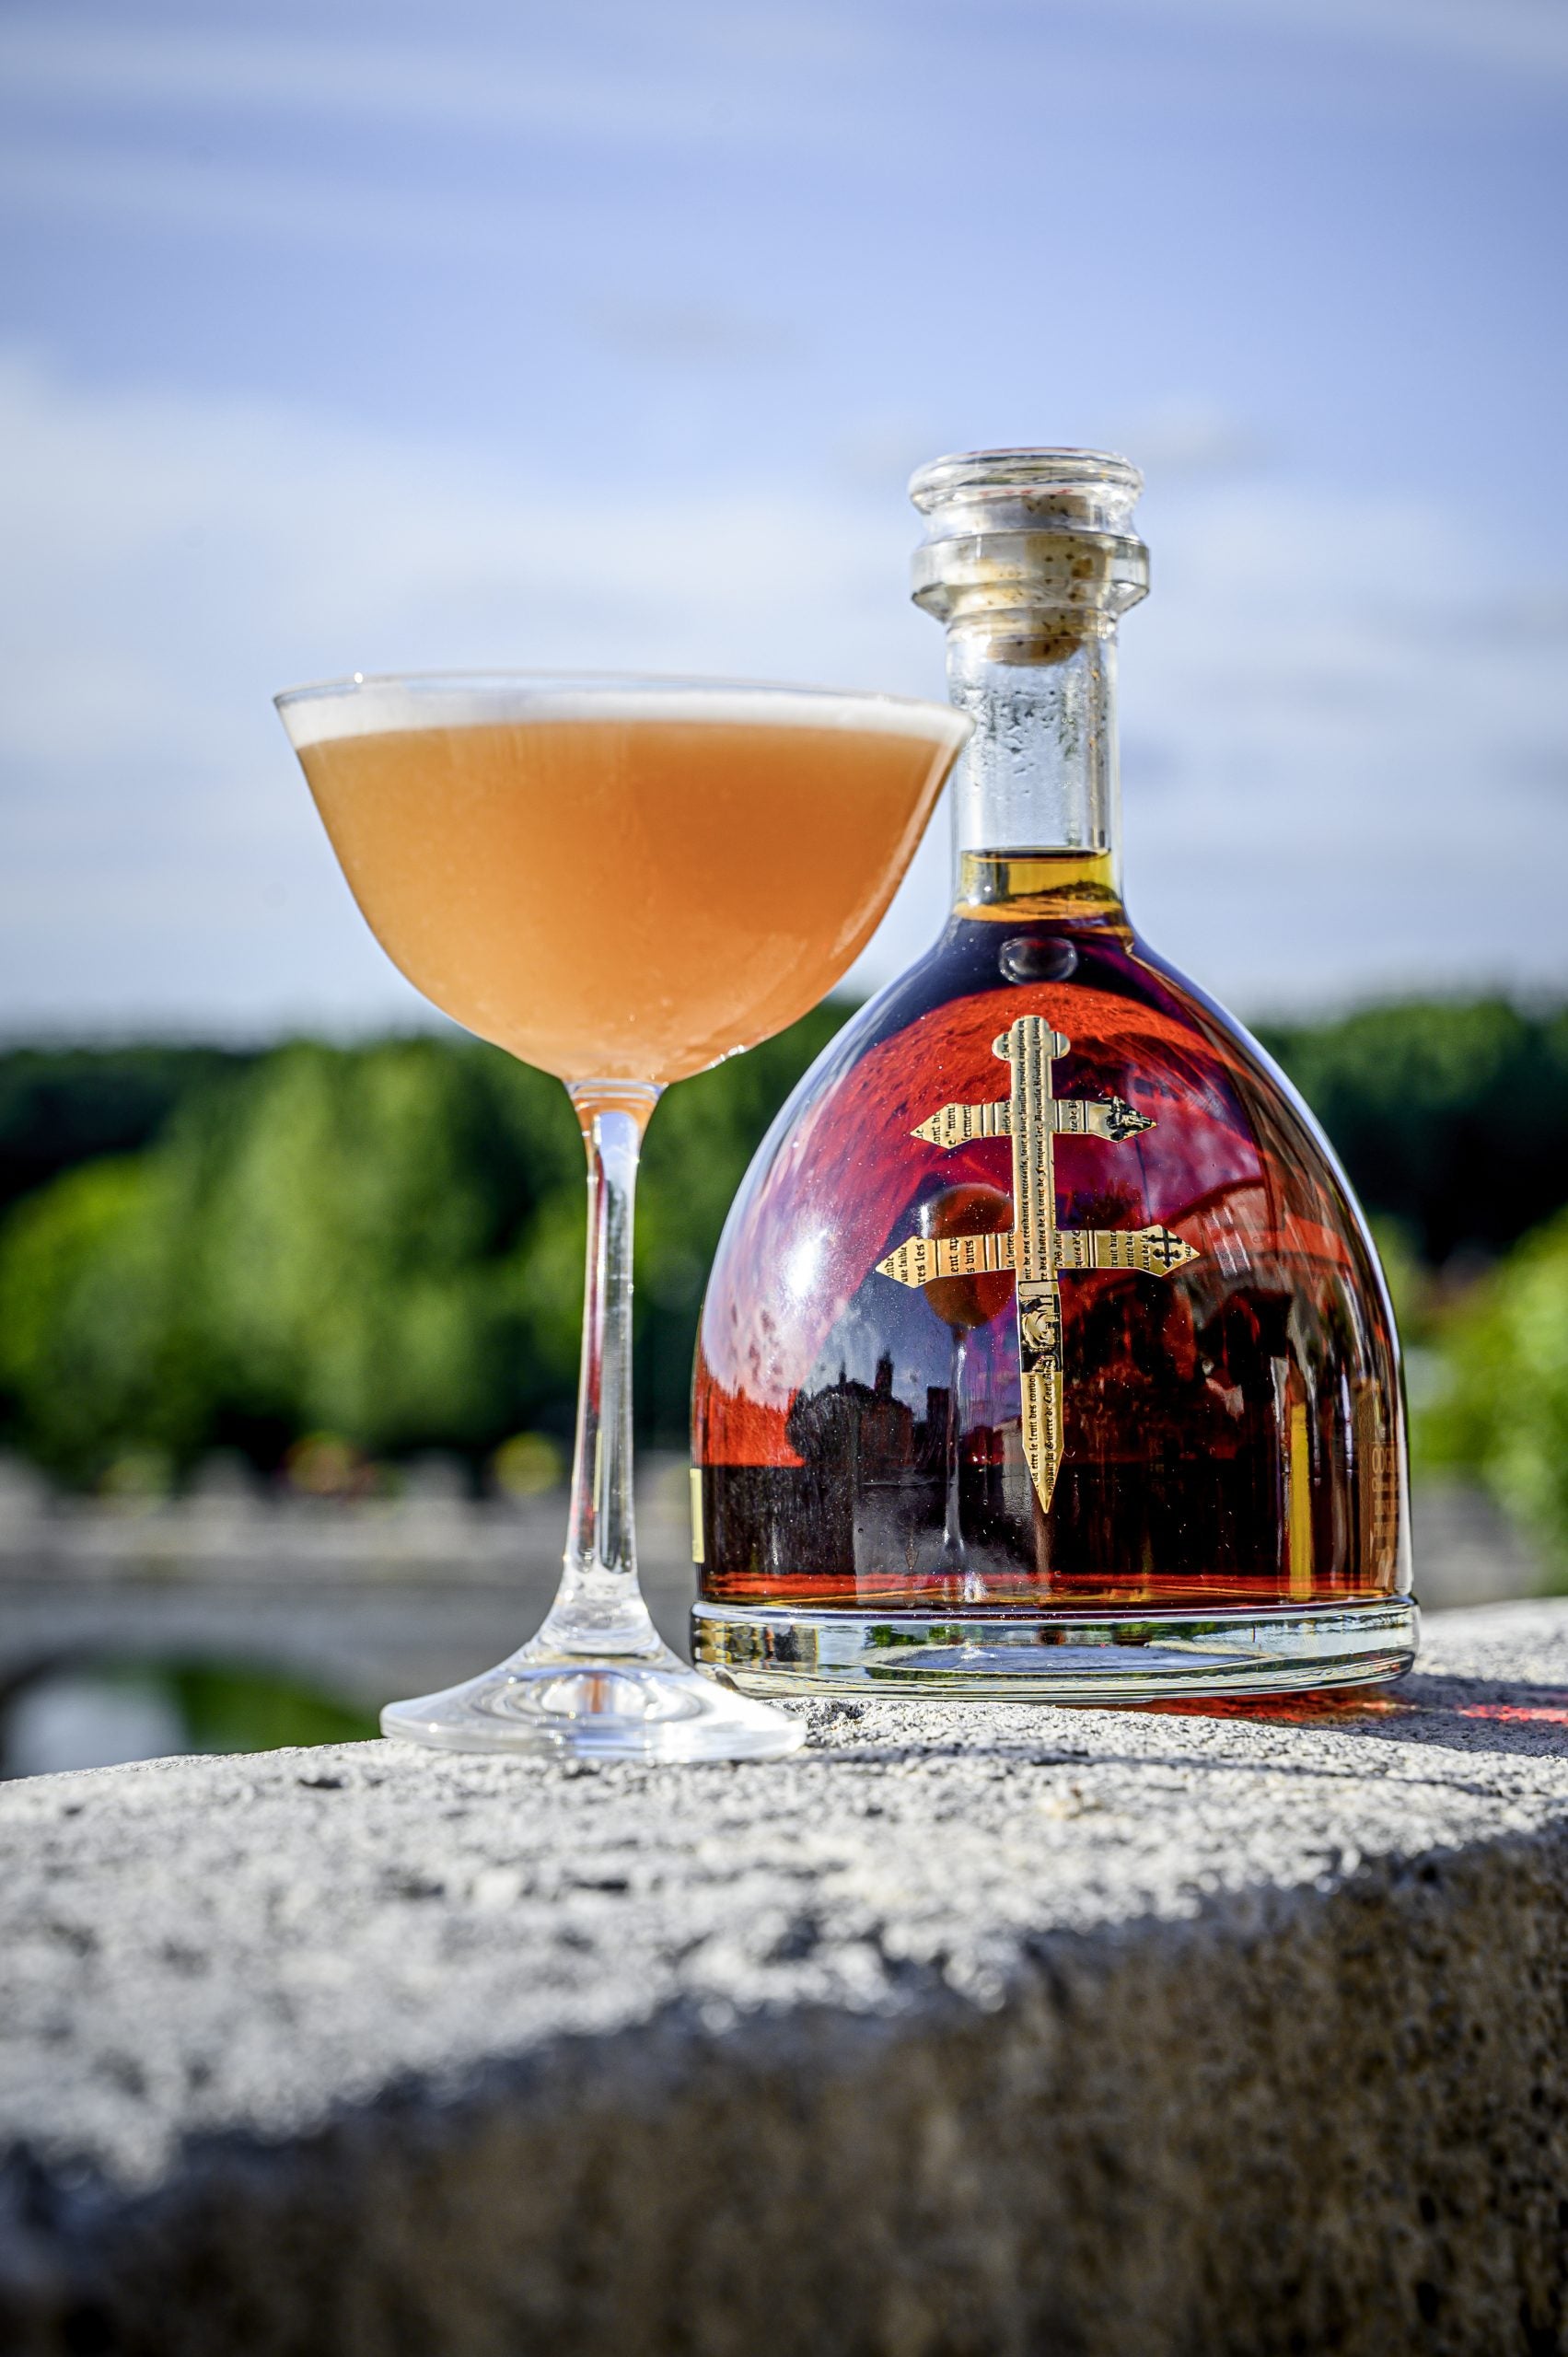 We Traveled To Cognac And Paris, France, To Experience What A True Bastille Day Celebration Is Like With D’USSÉ